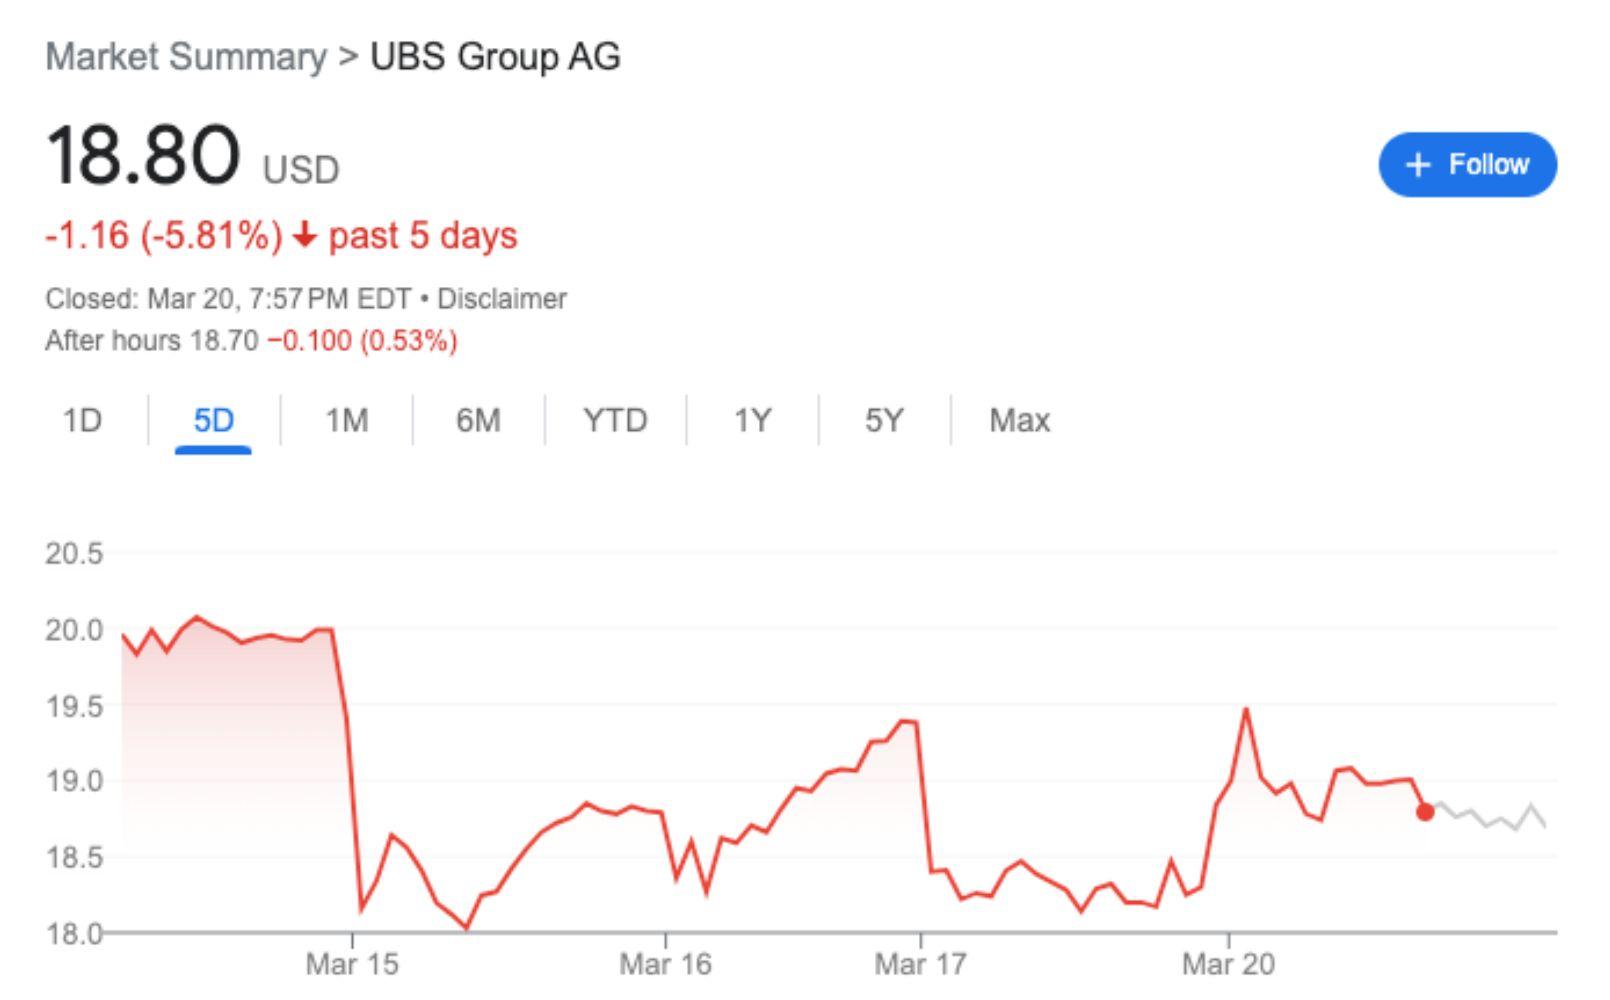 UBS stock